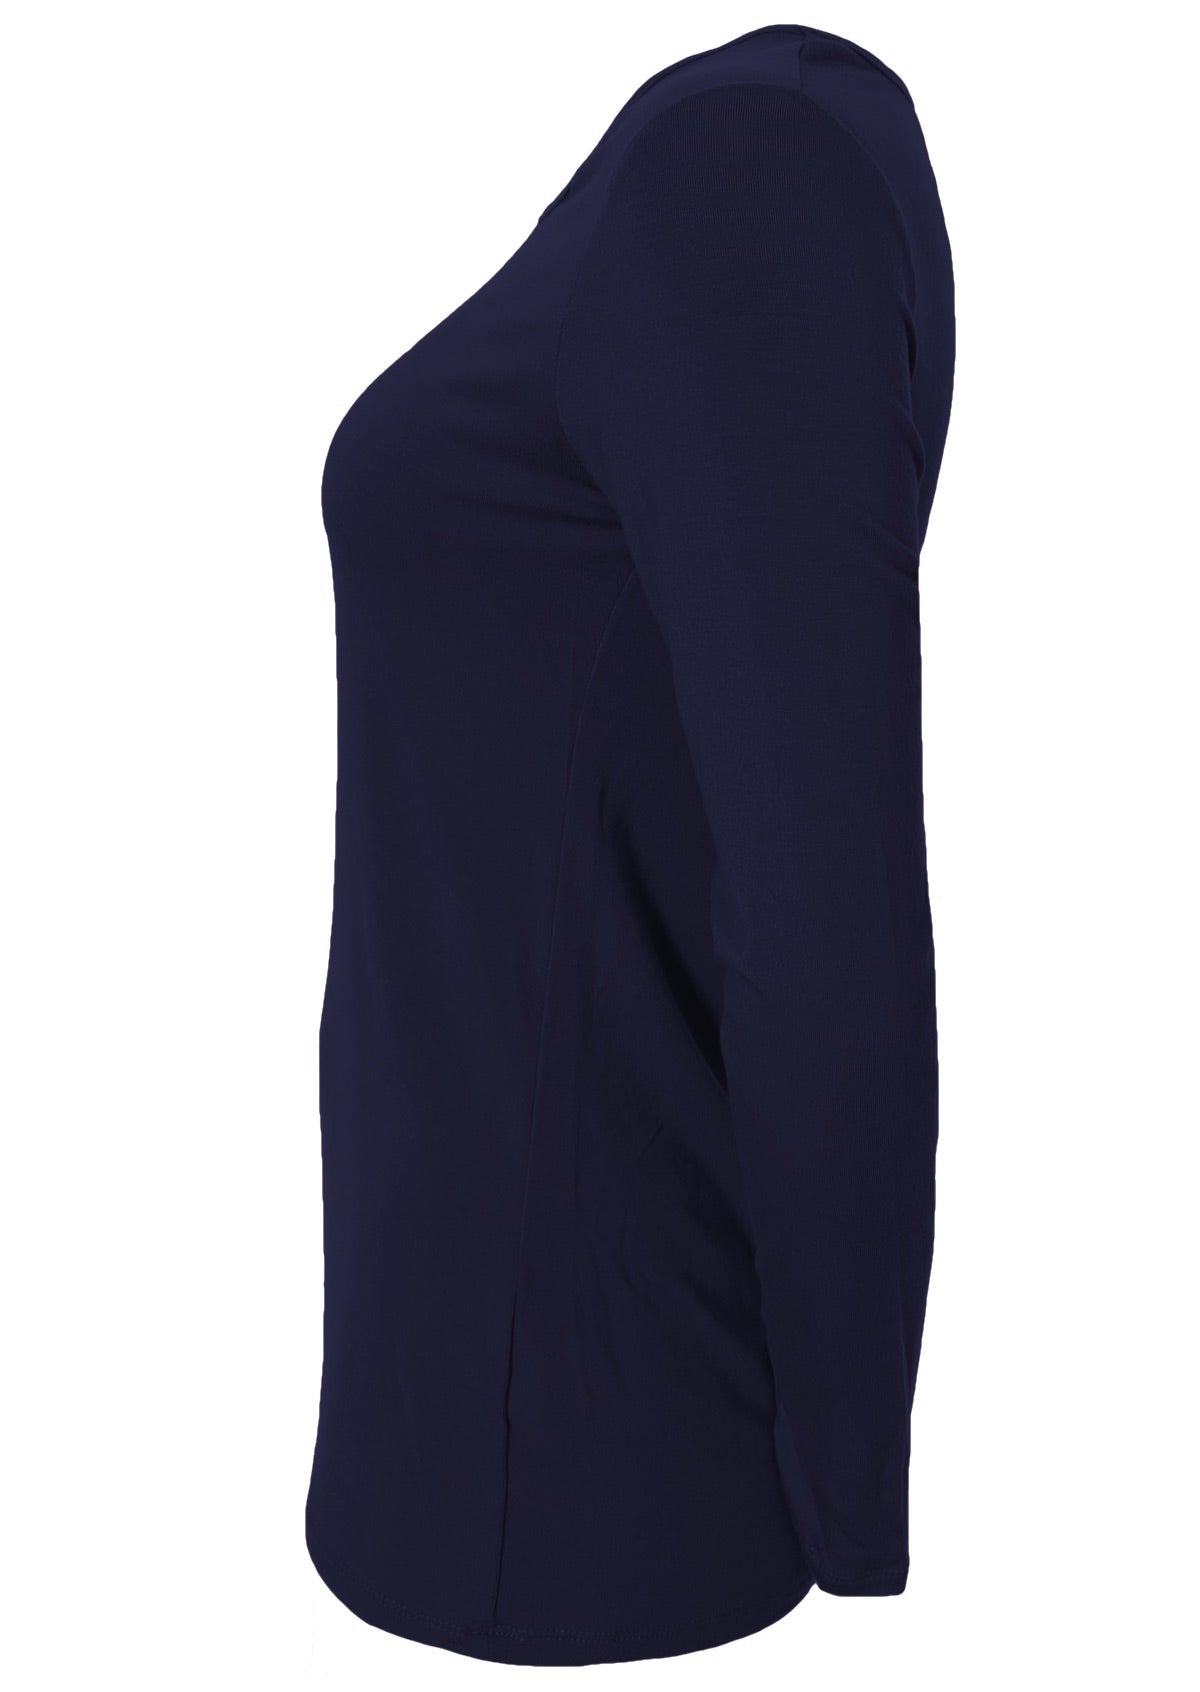 side view long sleeve navy women's top